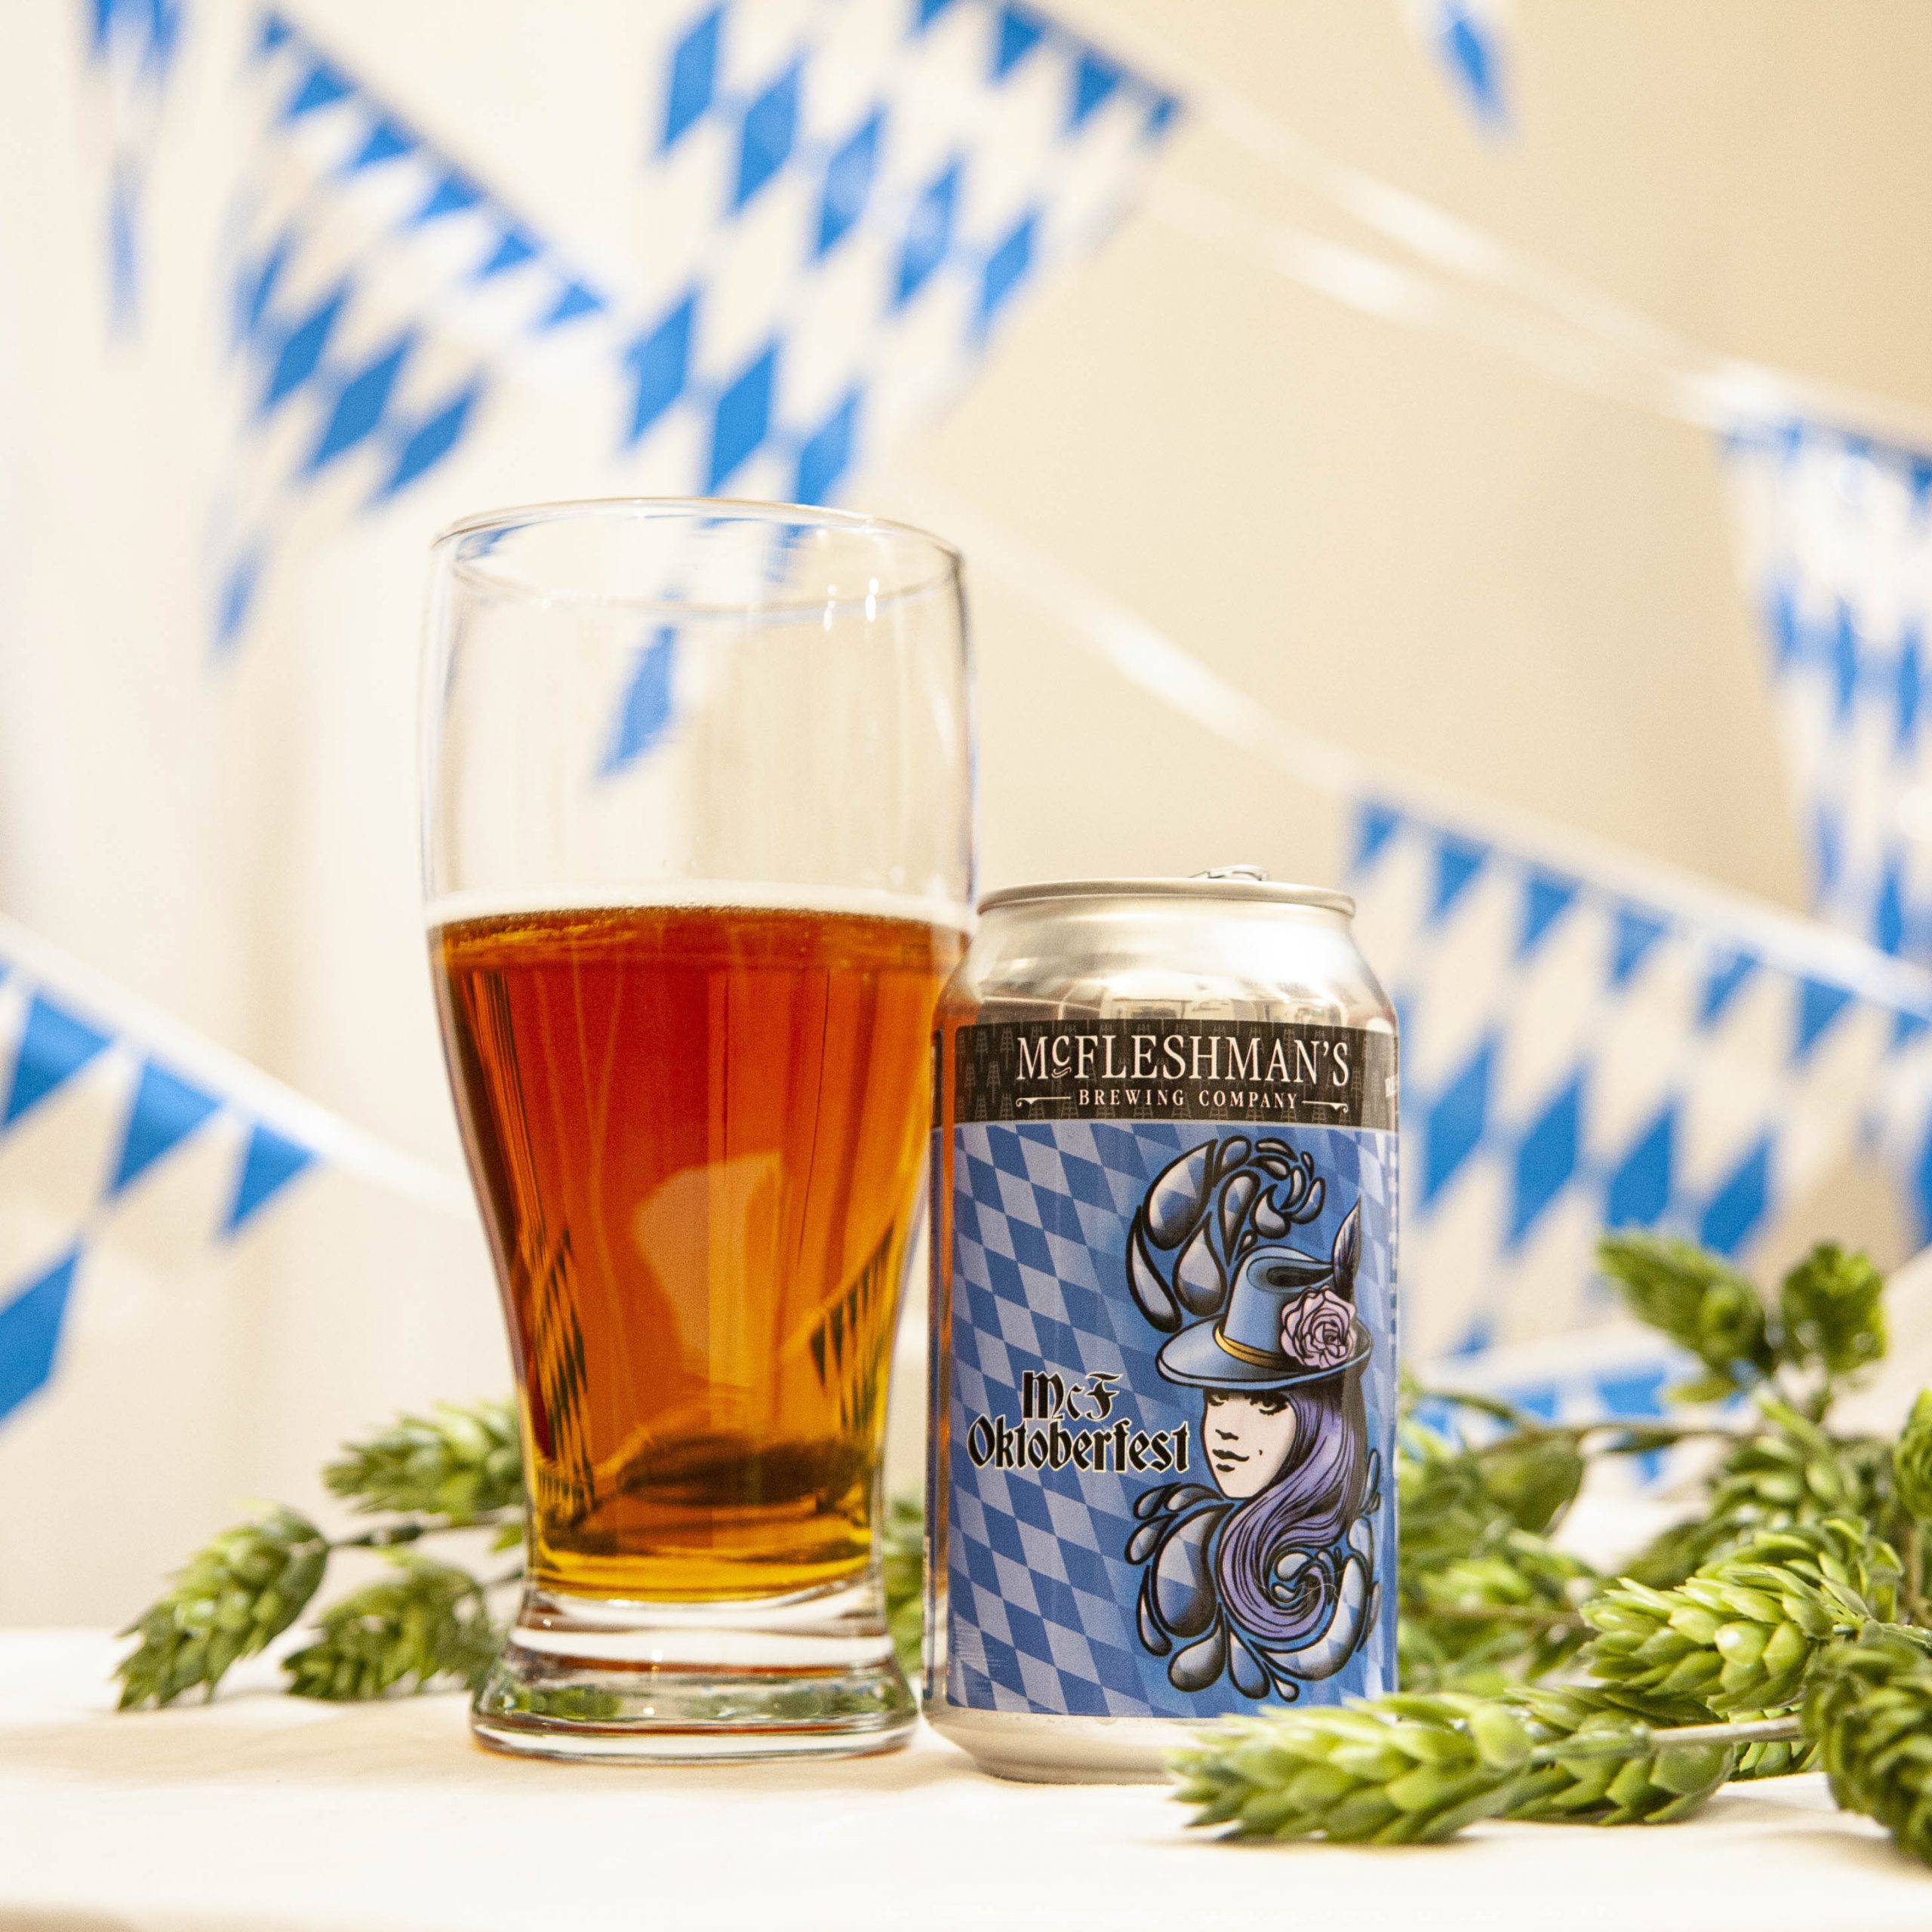 McFleshman's Oktoberfest is poured into a pilsner glass, amidst hop cones and white and blue bunting. 